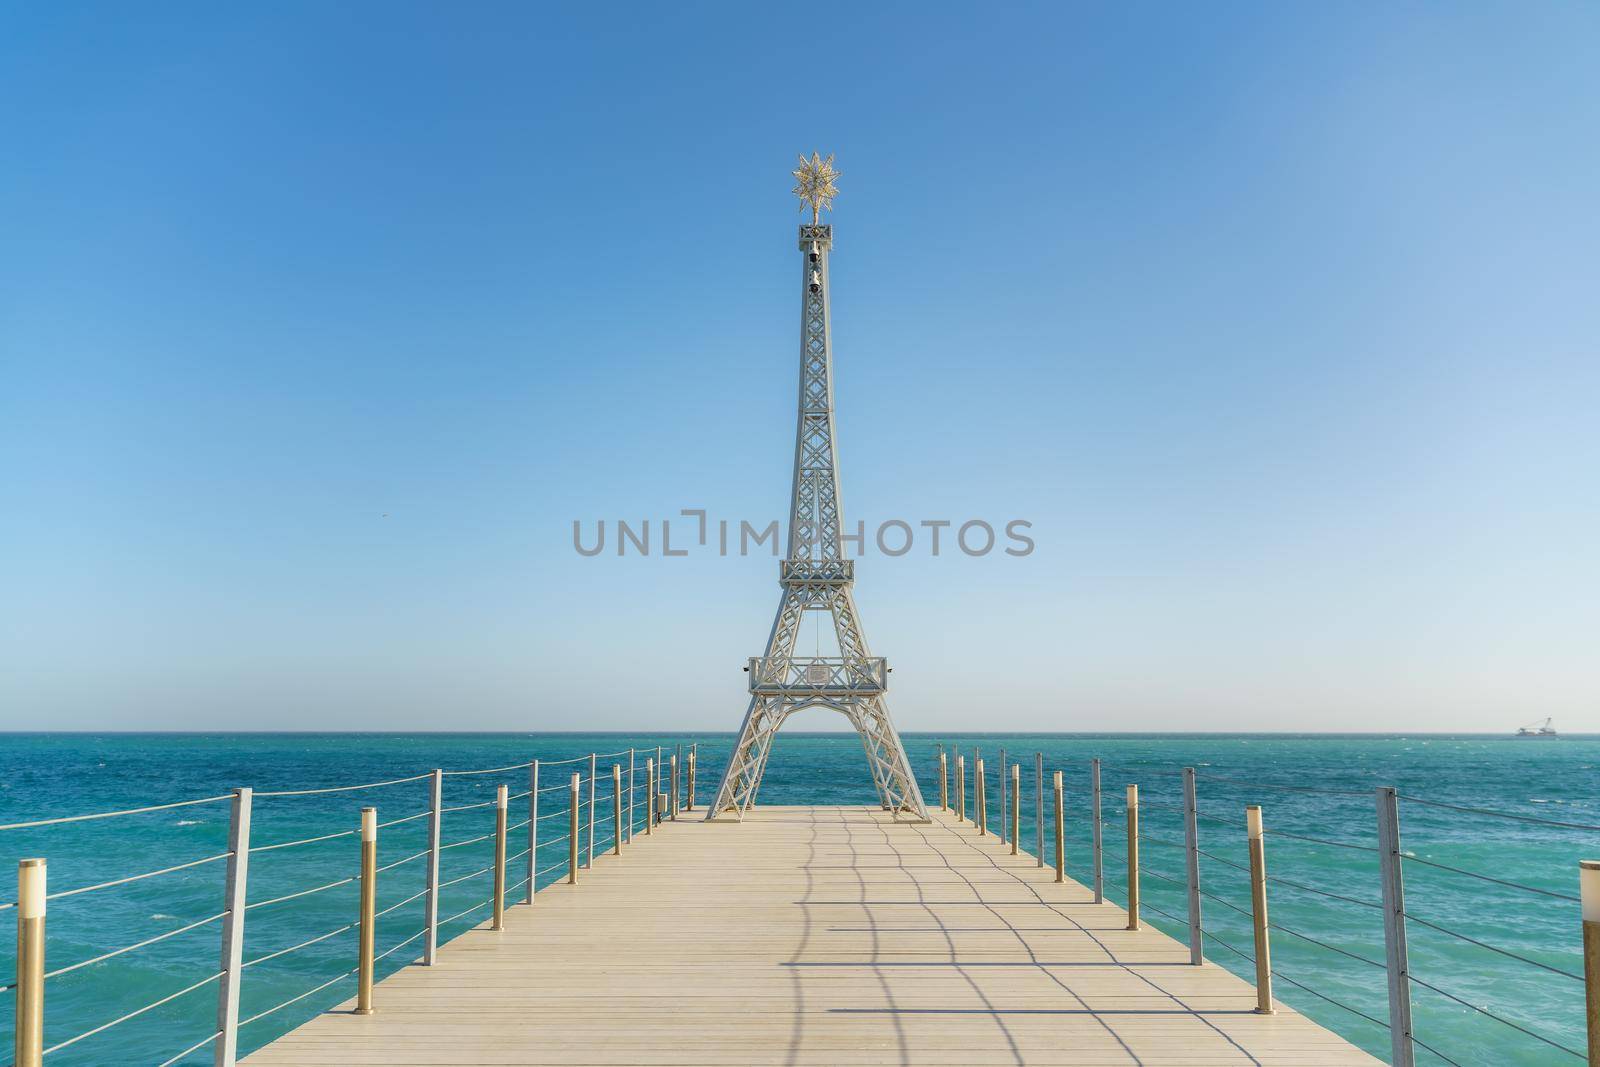 Large model of the Eiffel Tower on the beach